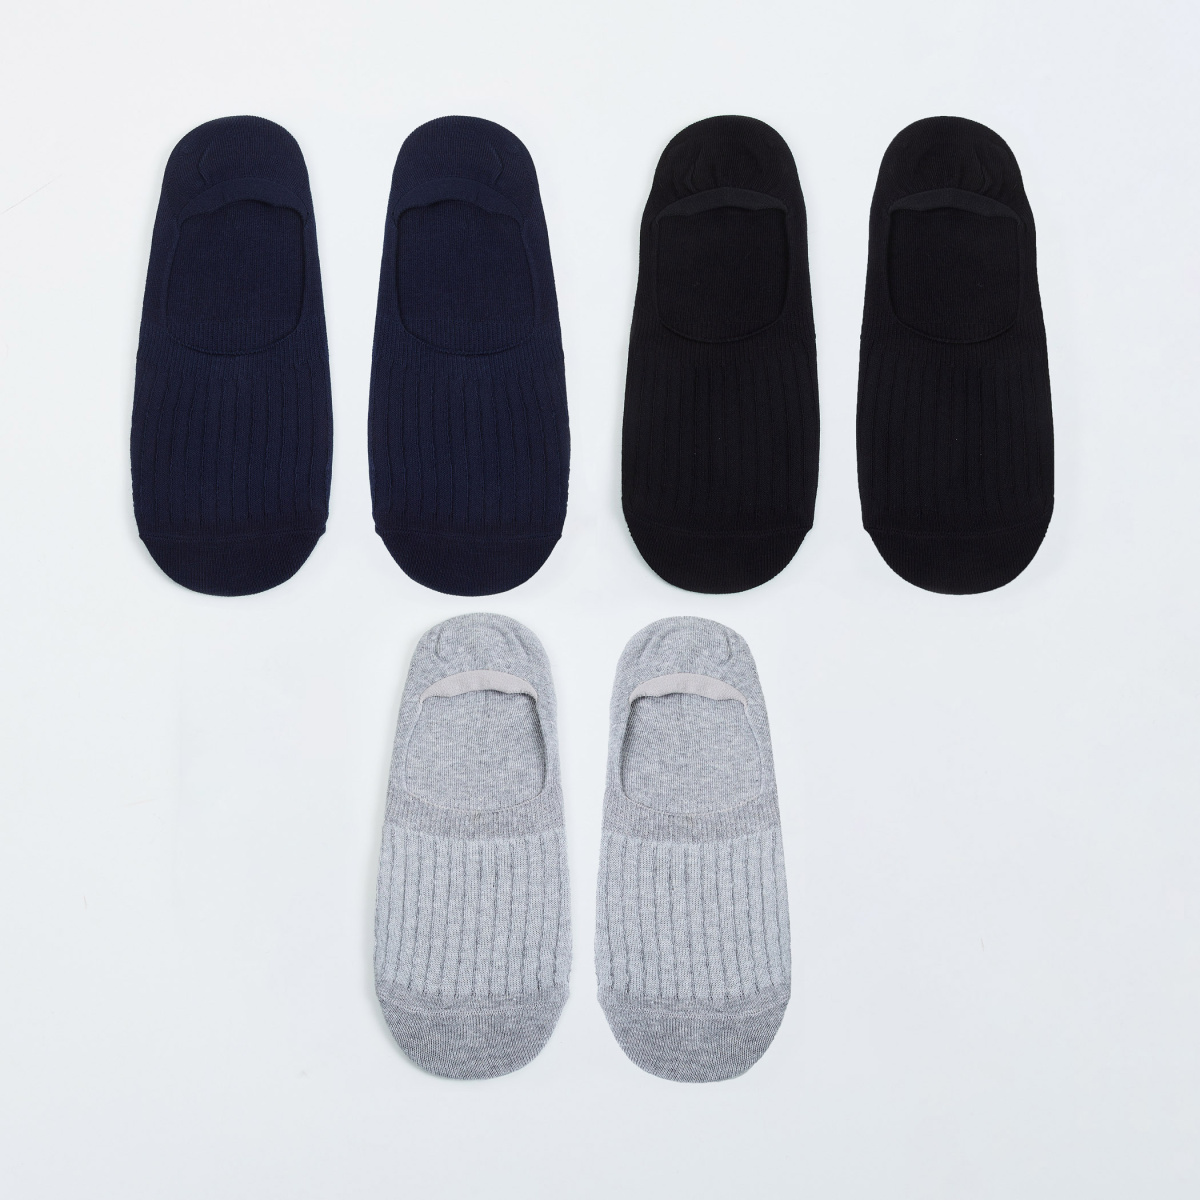 MAX Patterned Knit Socks- Pack of 3